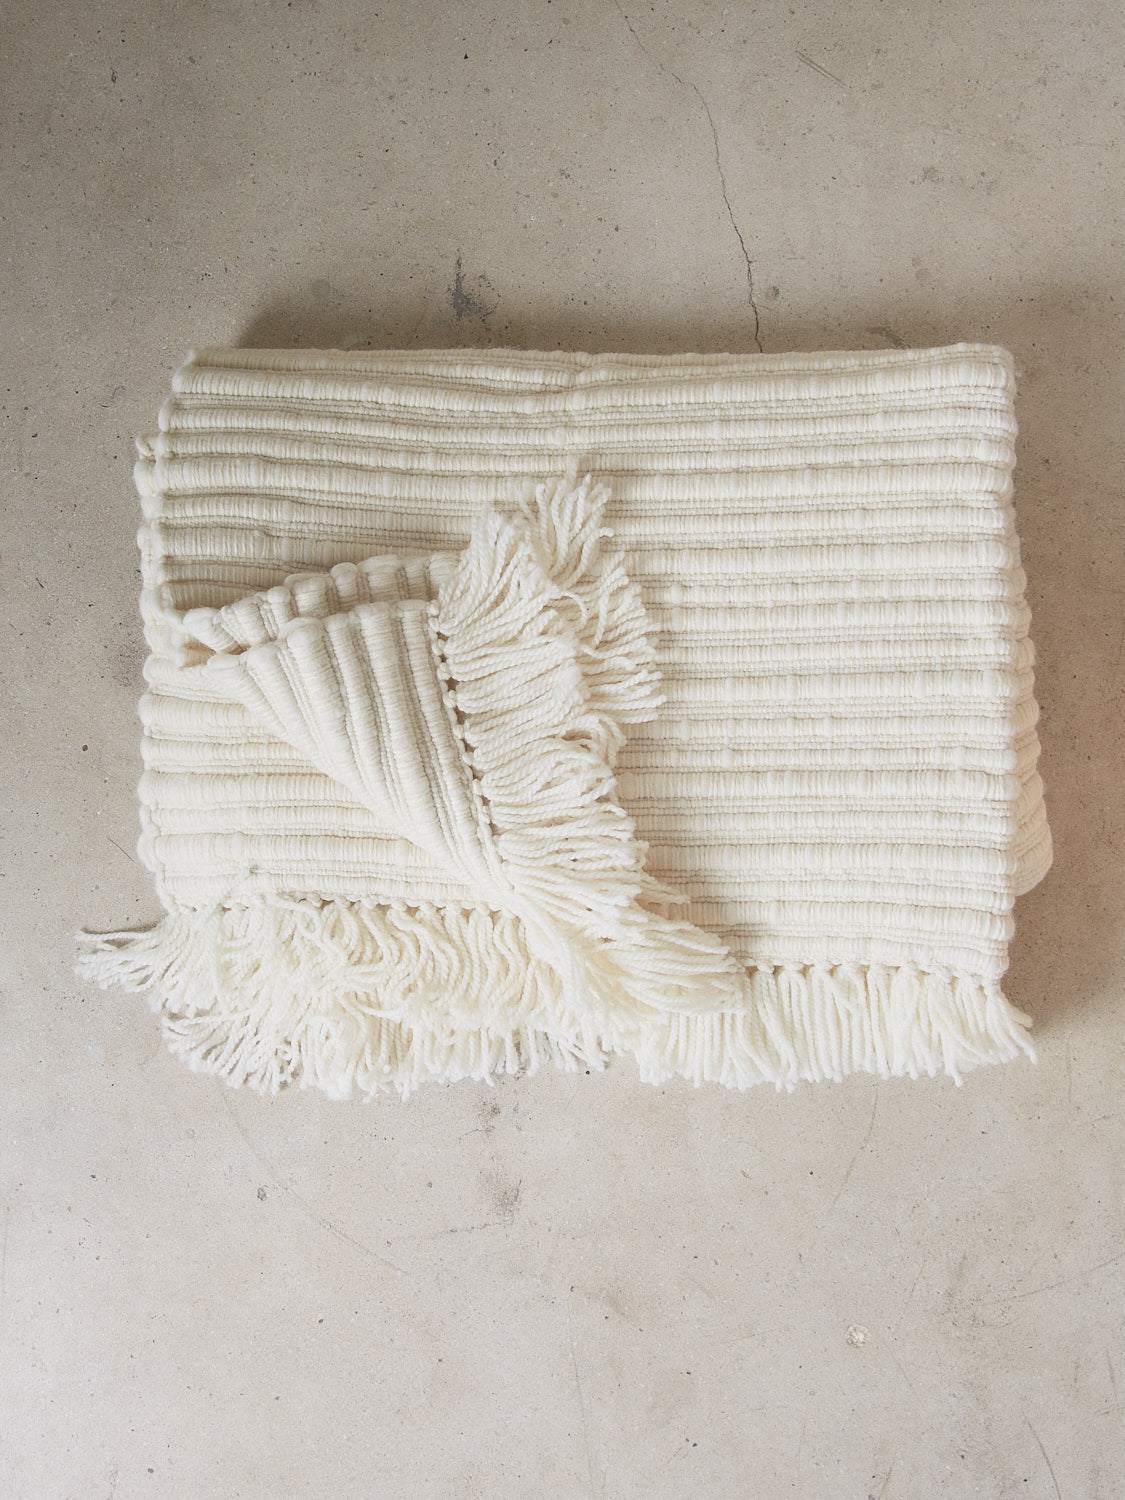 Aspen Blanket. A substantial, tactile and weighty statement throw blanket hand spun from the softest merino wool in an elegant, neutral cream color.